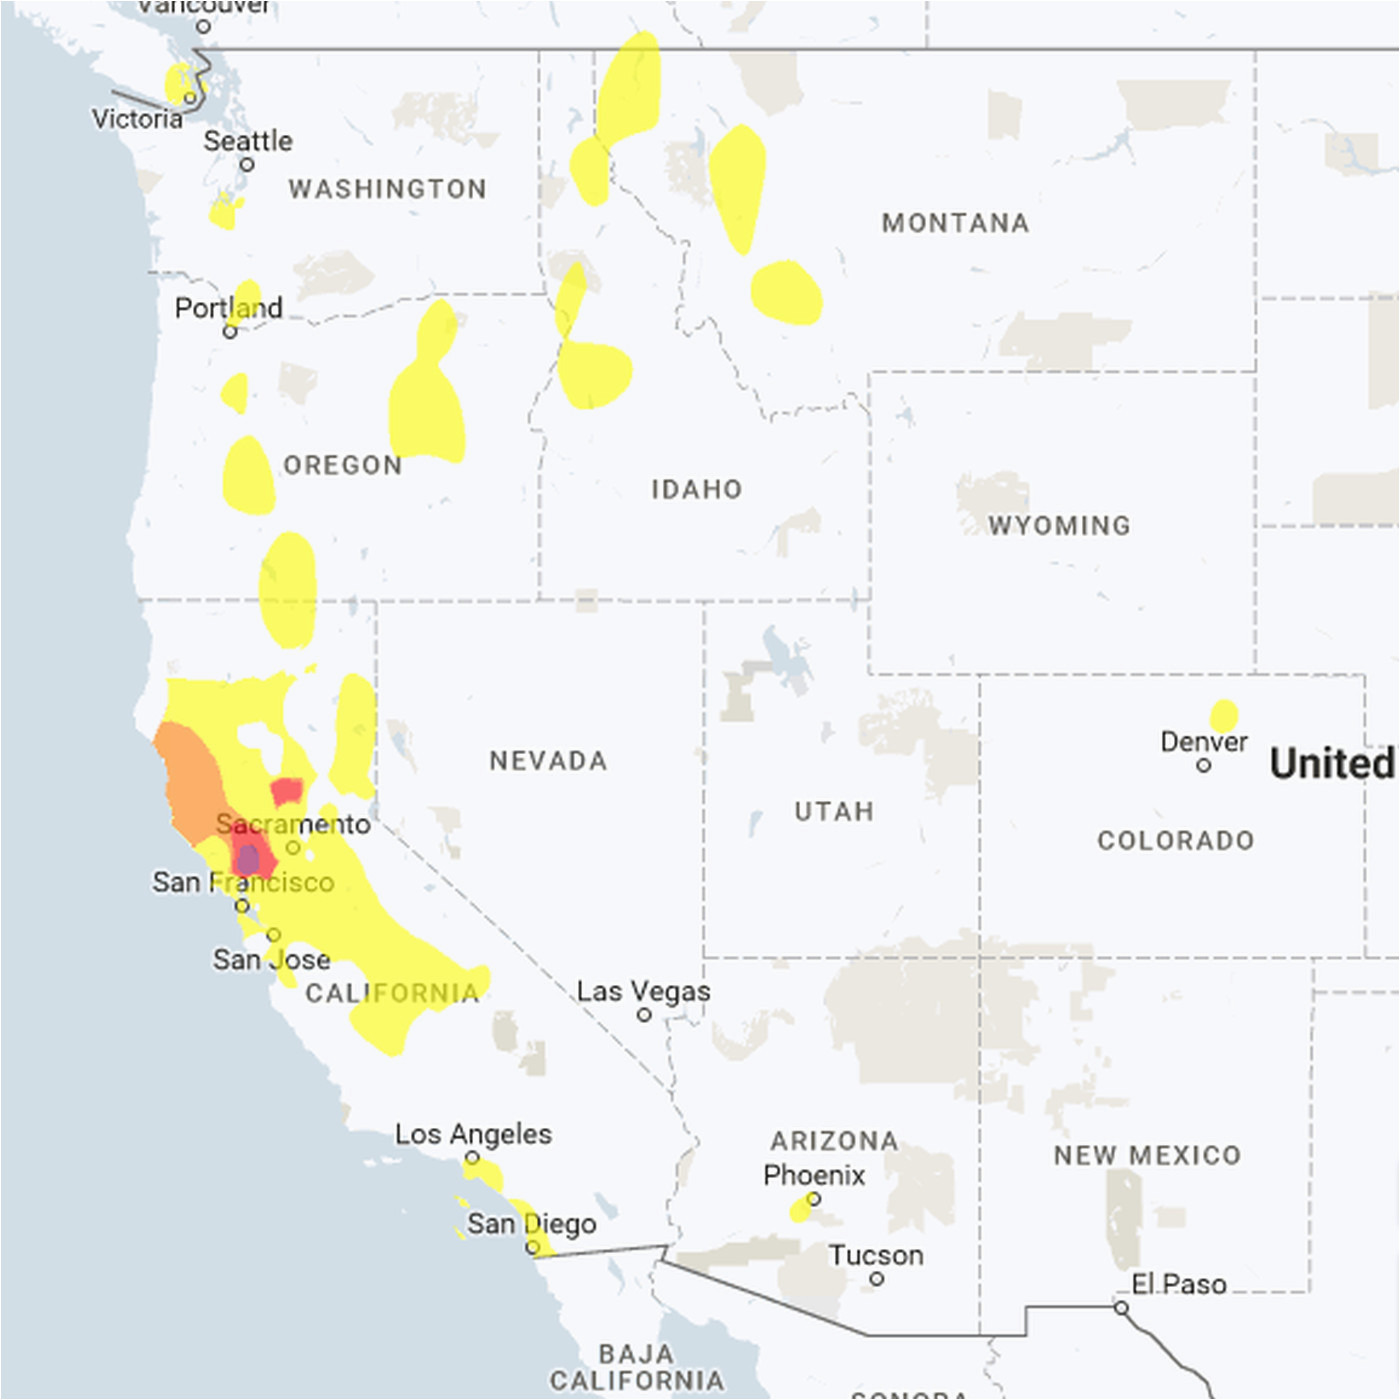 bay area air quality map fresh fdl resource management environmental